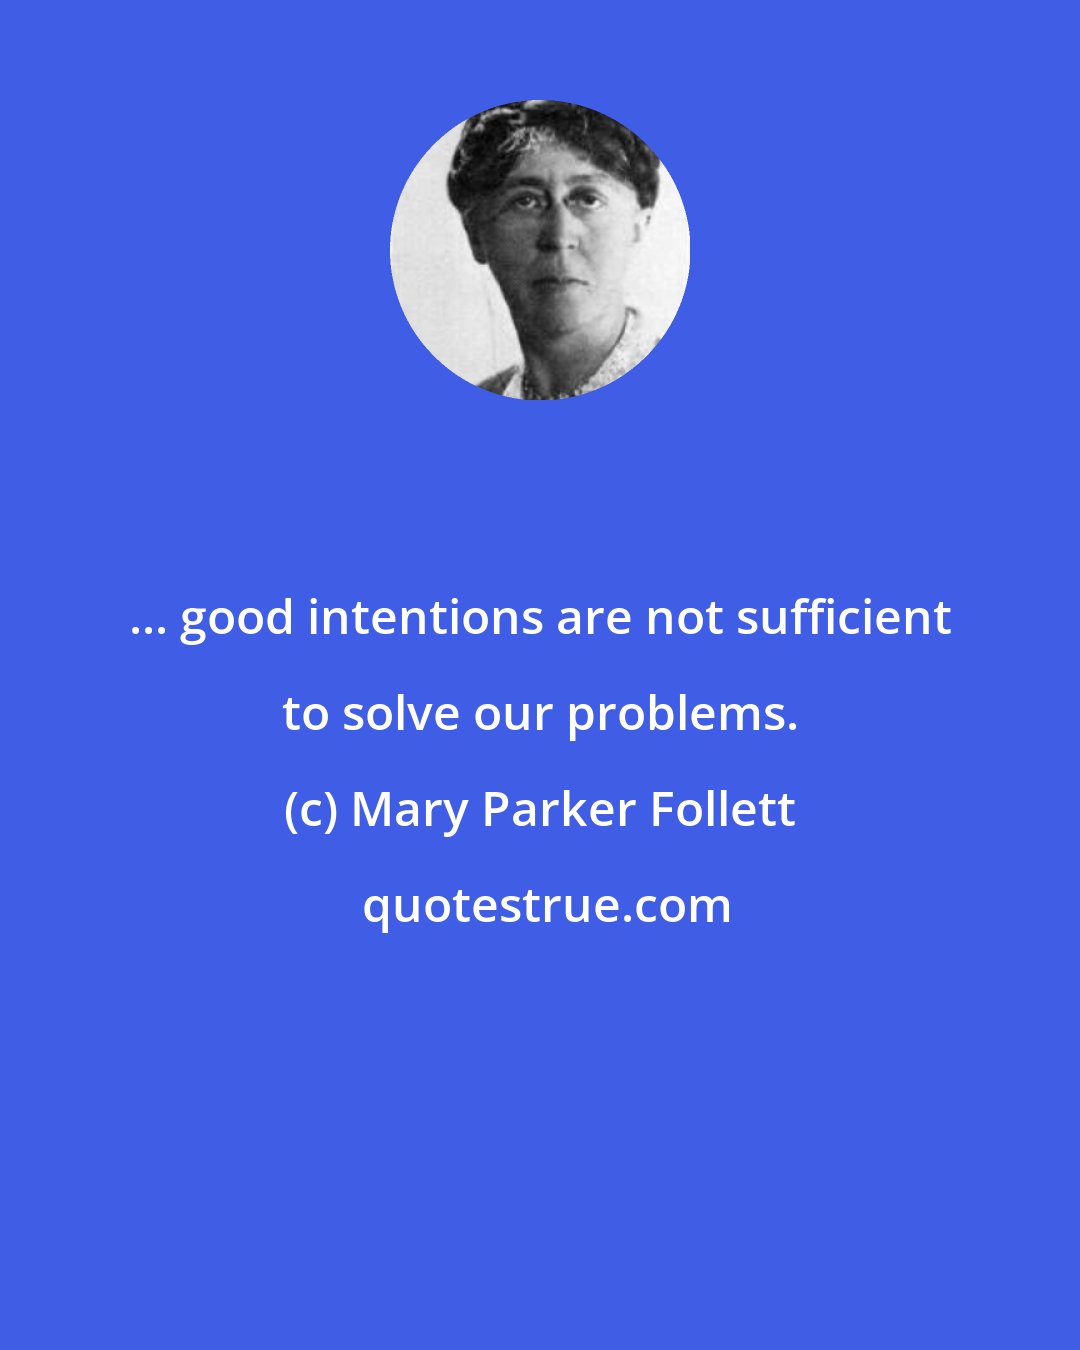 Mary Parker Follett: ... good intentions are not sufficient to solve our problems.